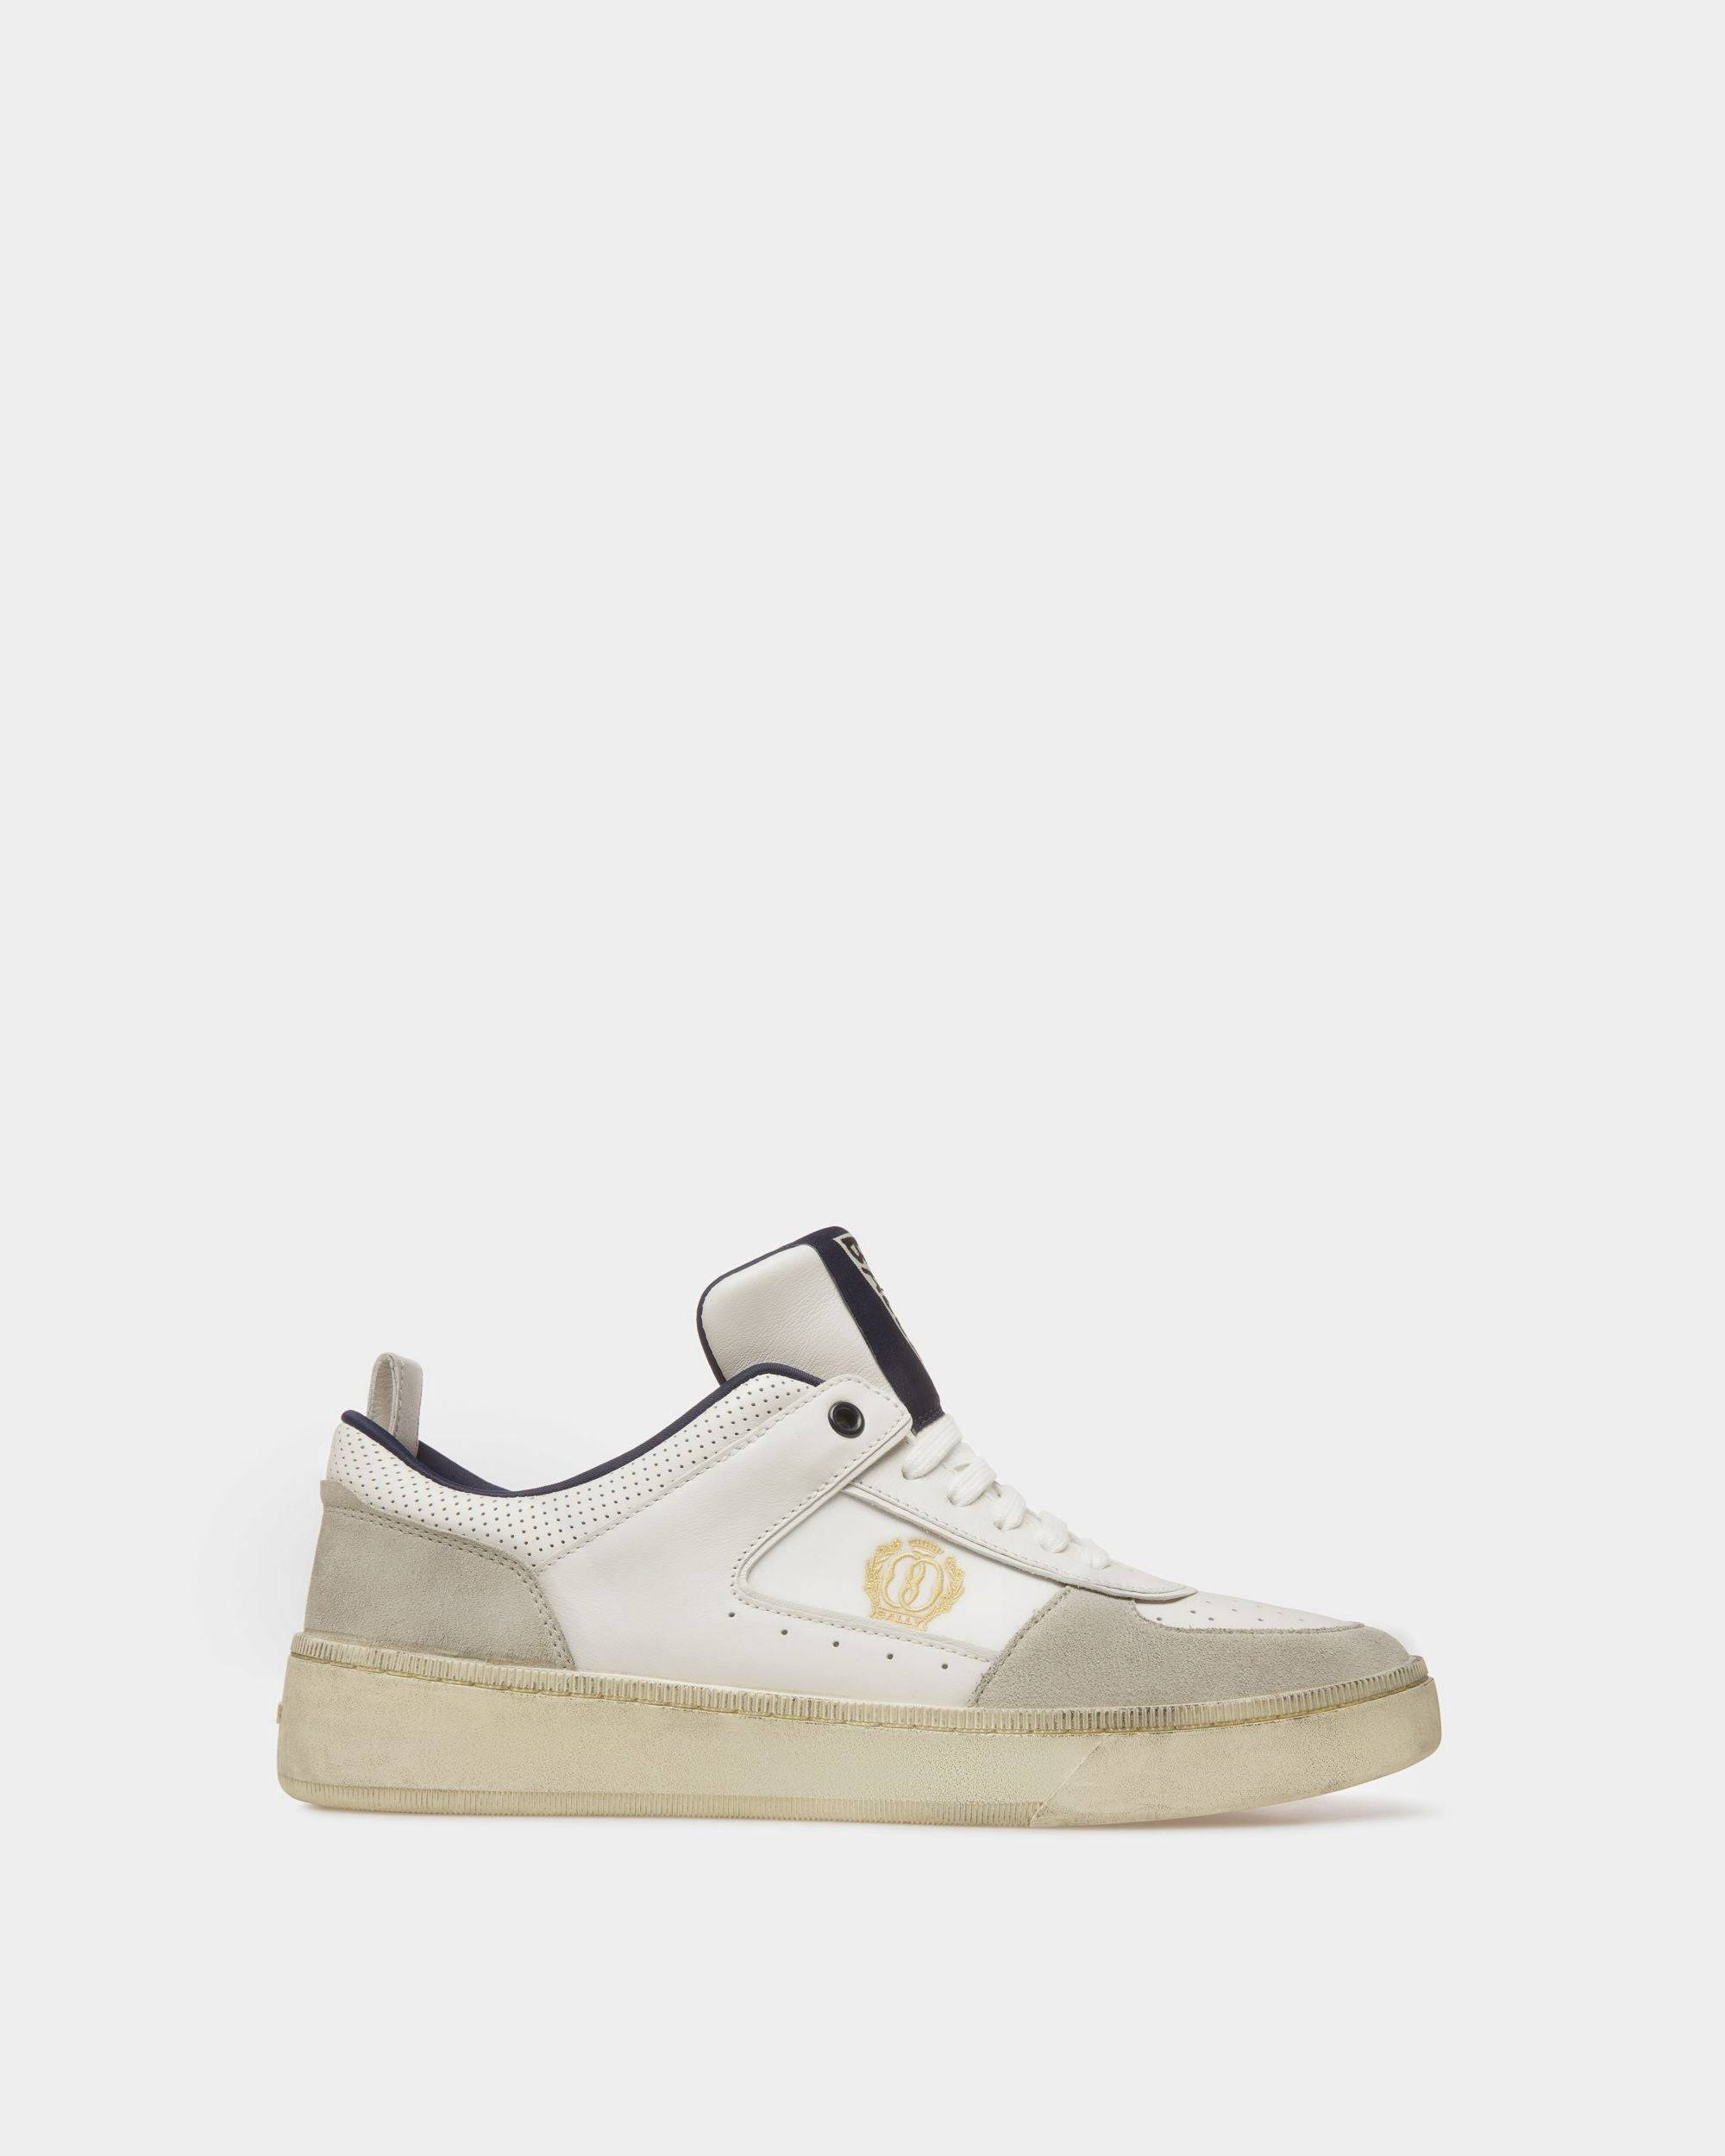 Men's Raise Sneakers In Dusty White And Midnight Leather And Fabric | Bally | Still Life Side